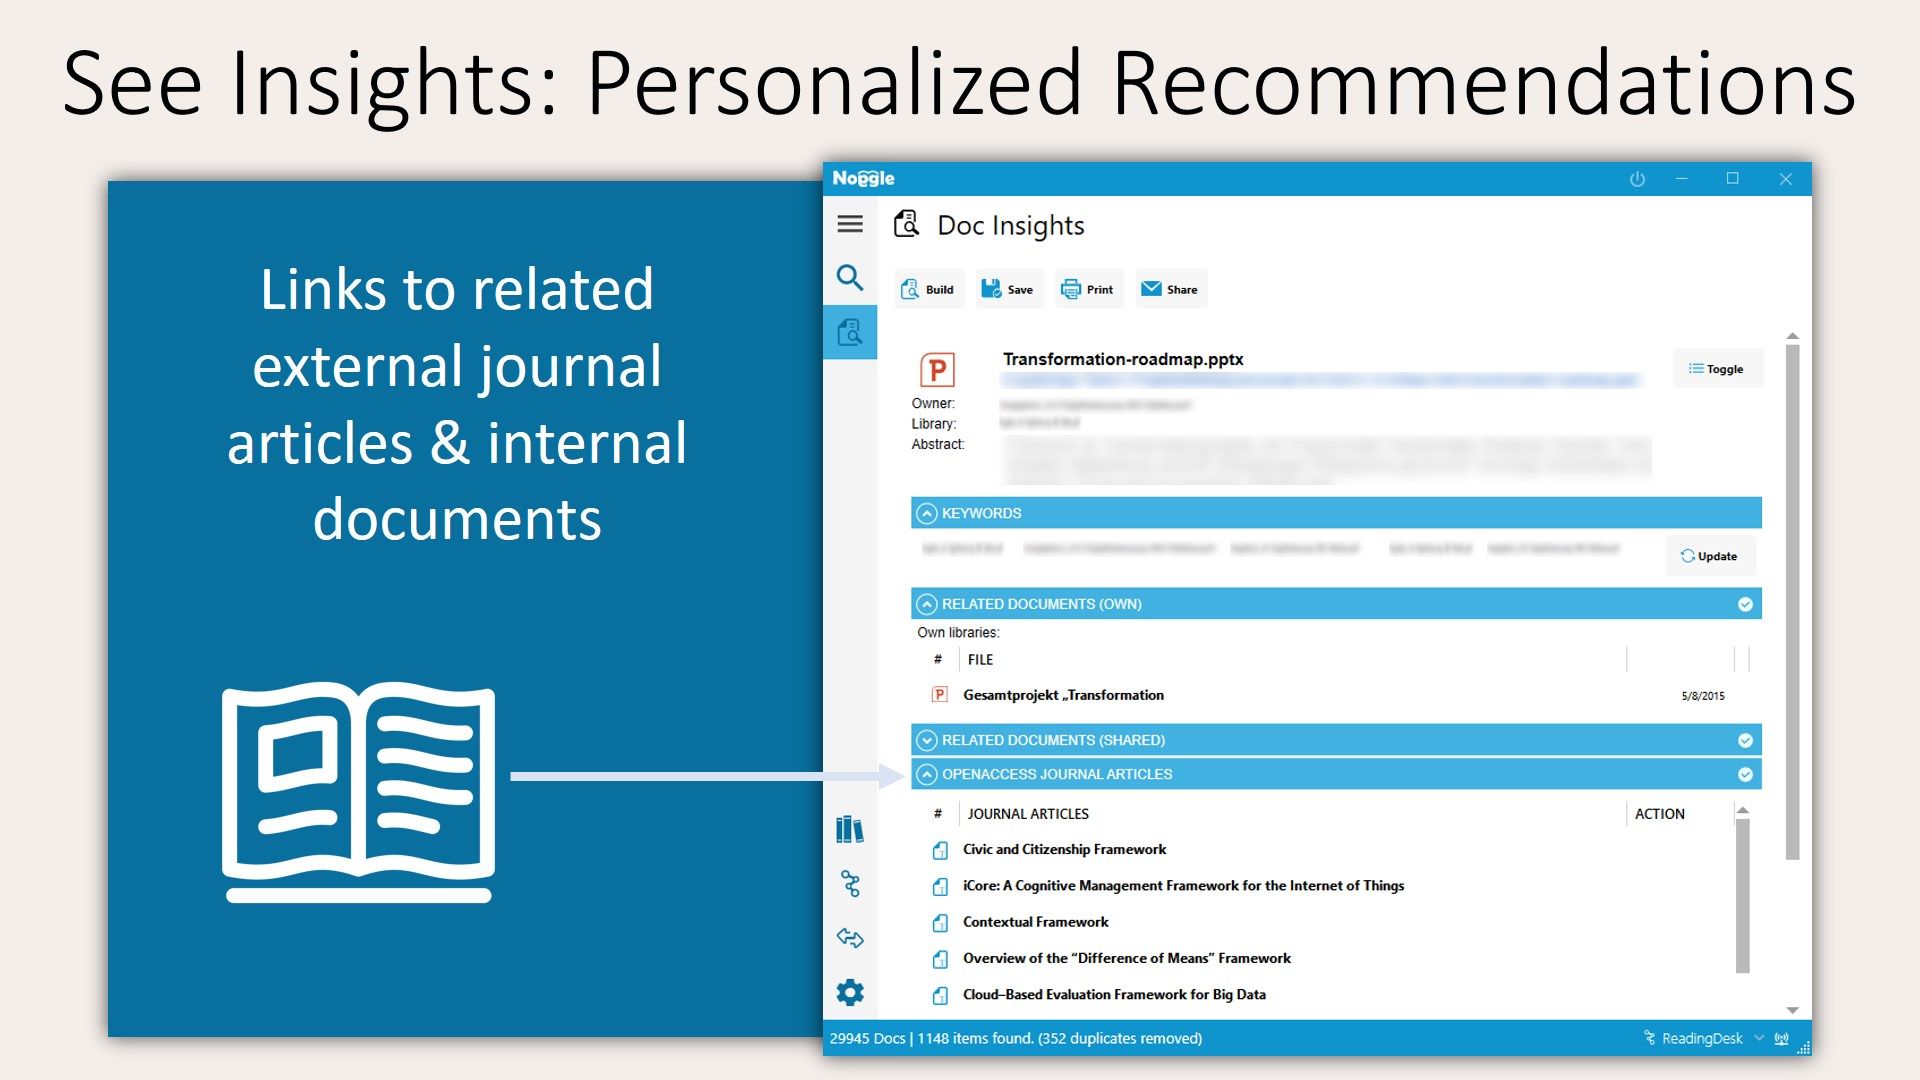 Get insights based on personalized recommendations